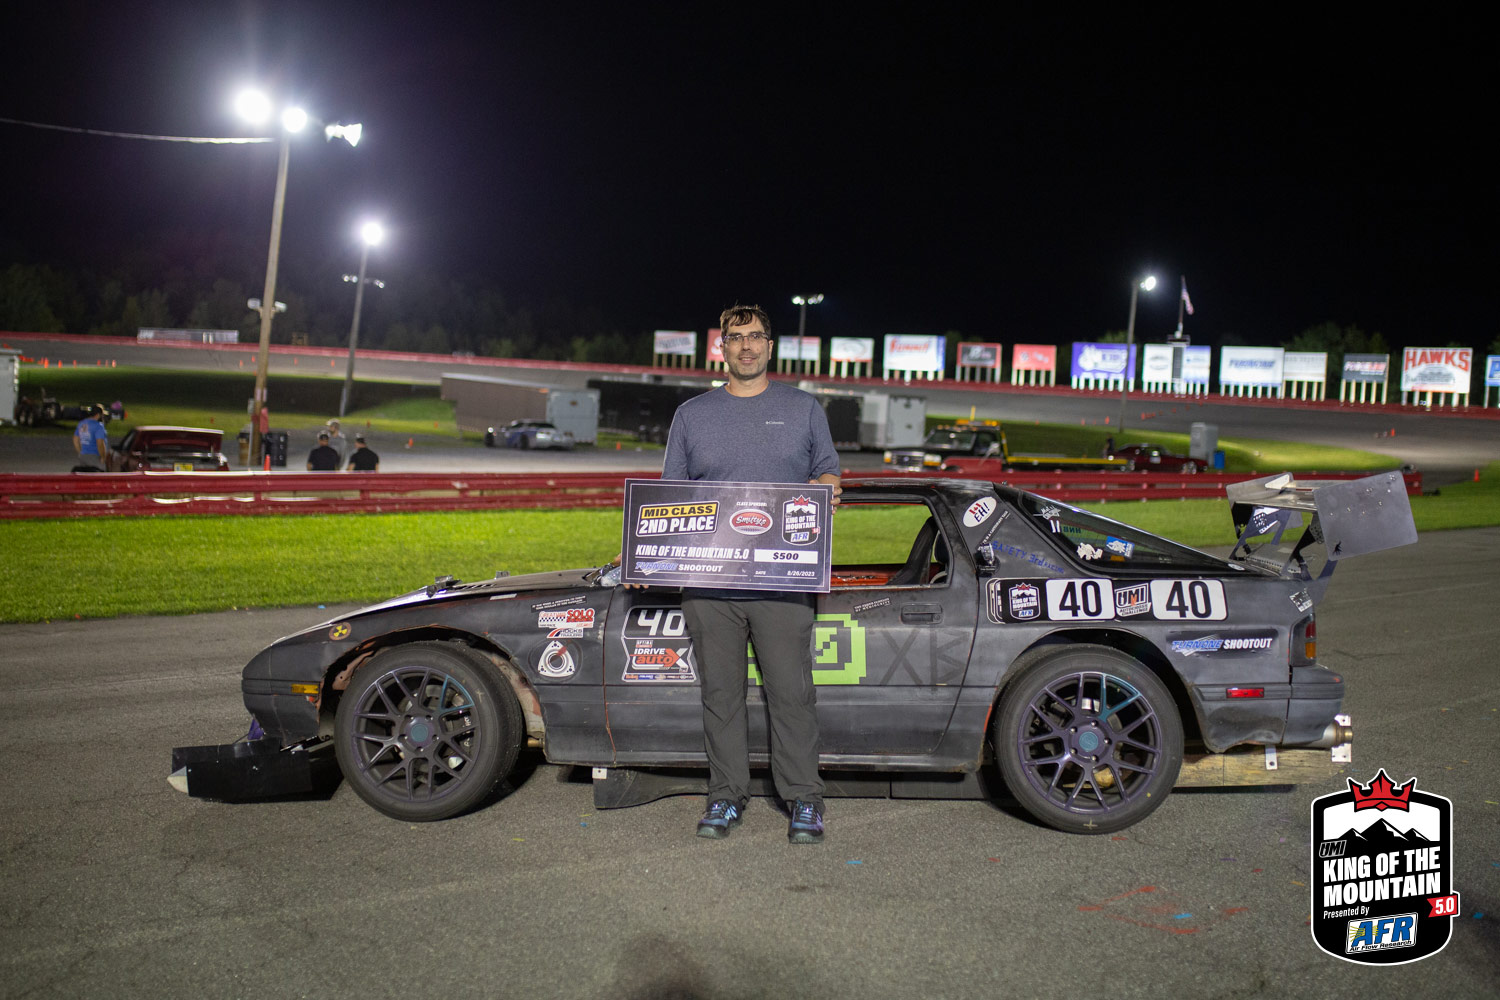 A man standing next to a race car at night.